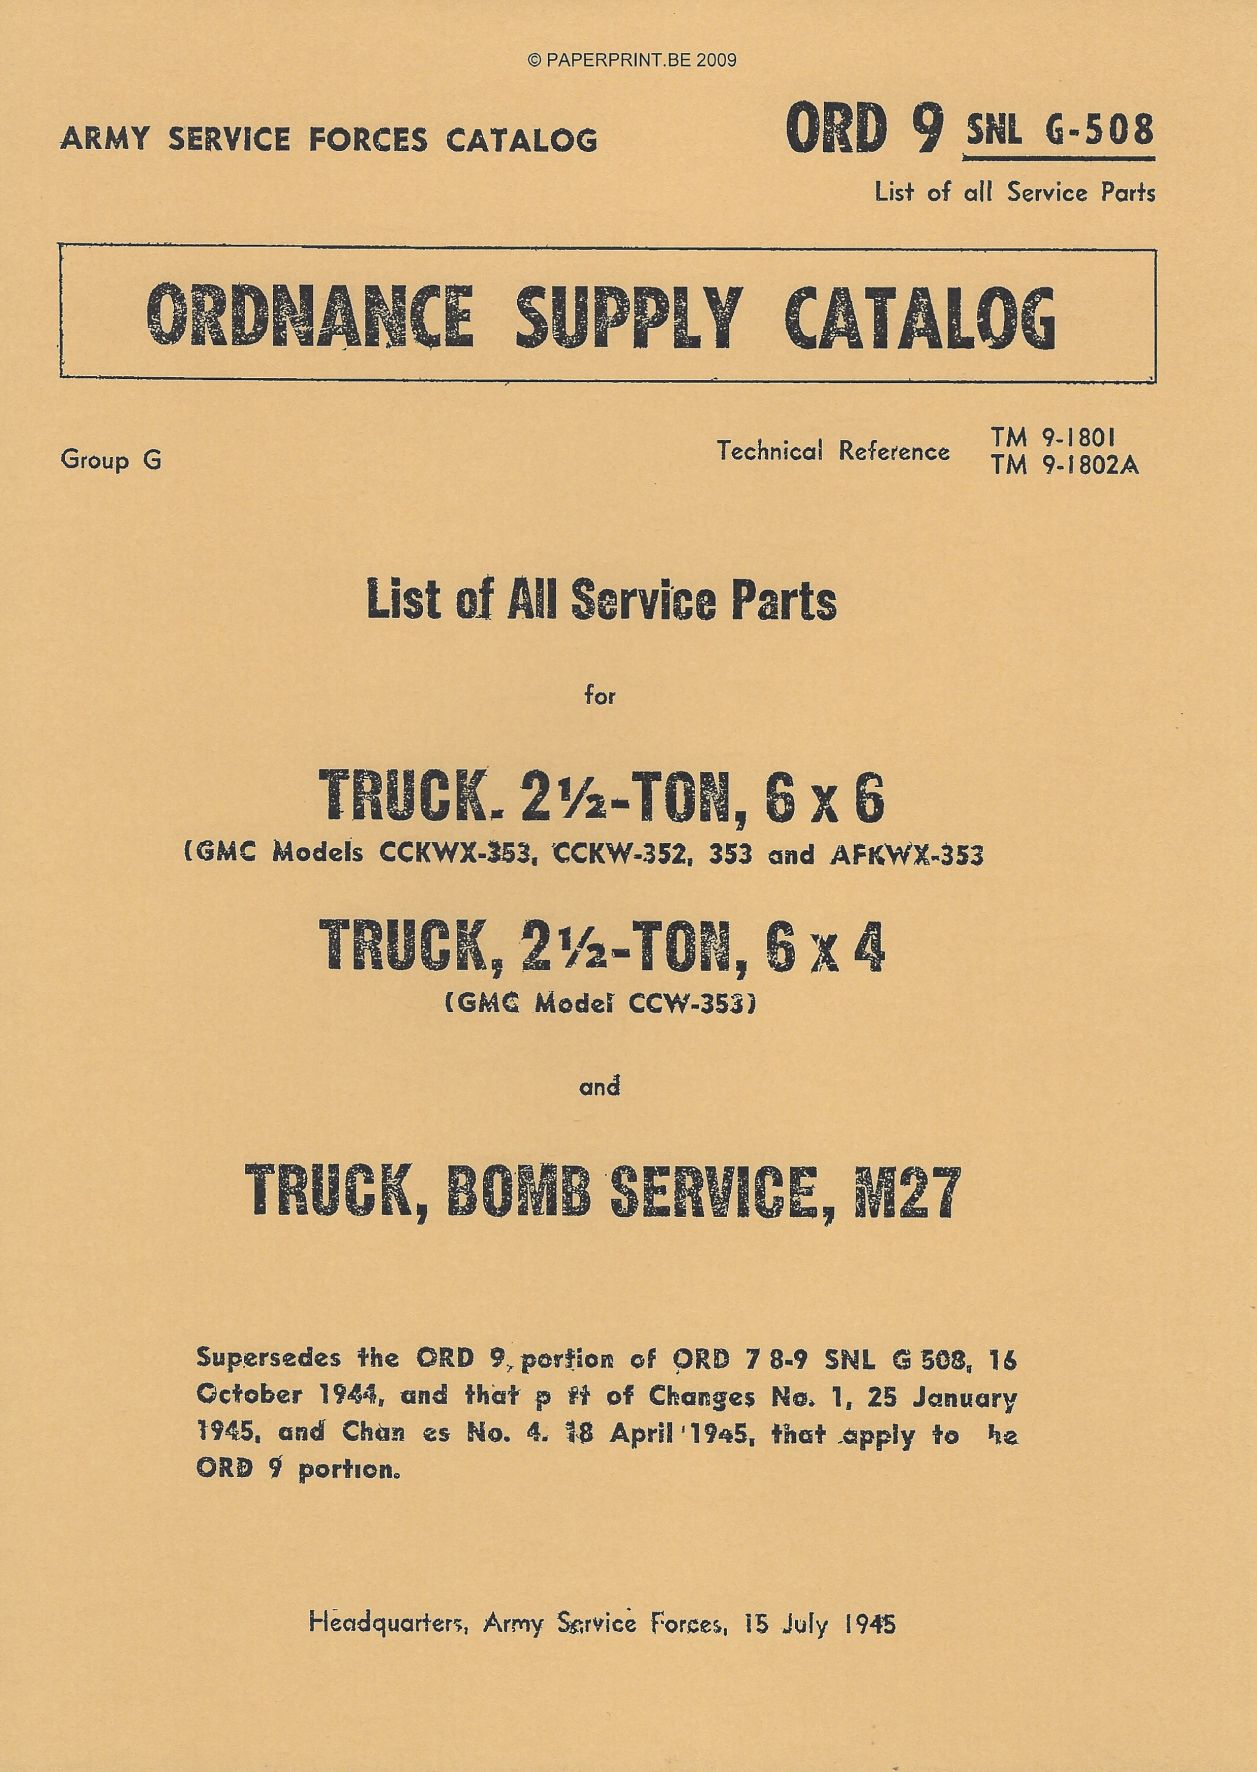 SNL G-508 US PARTS LIST FOR CMC TRUCK, 2 ½ - TON, 6x6 AND TRUCK, 2 ½ - TON, 6x4